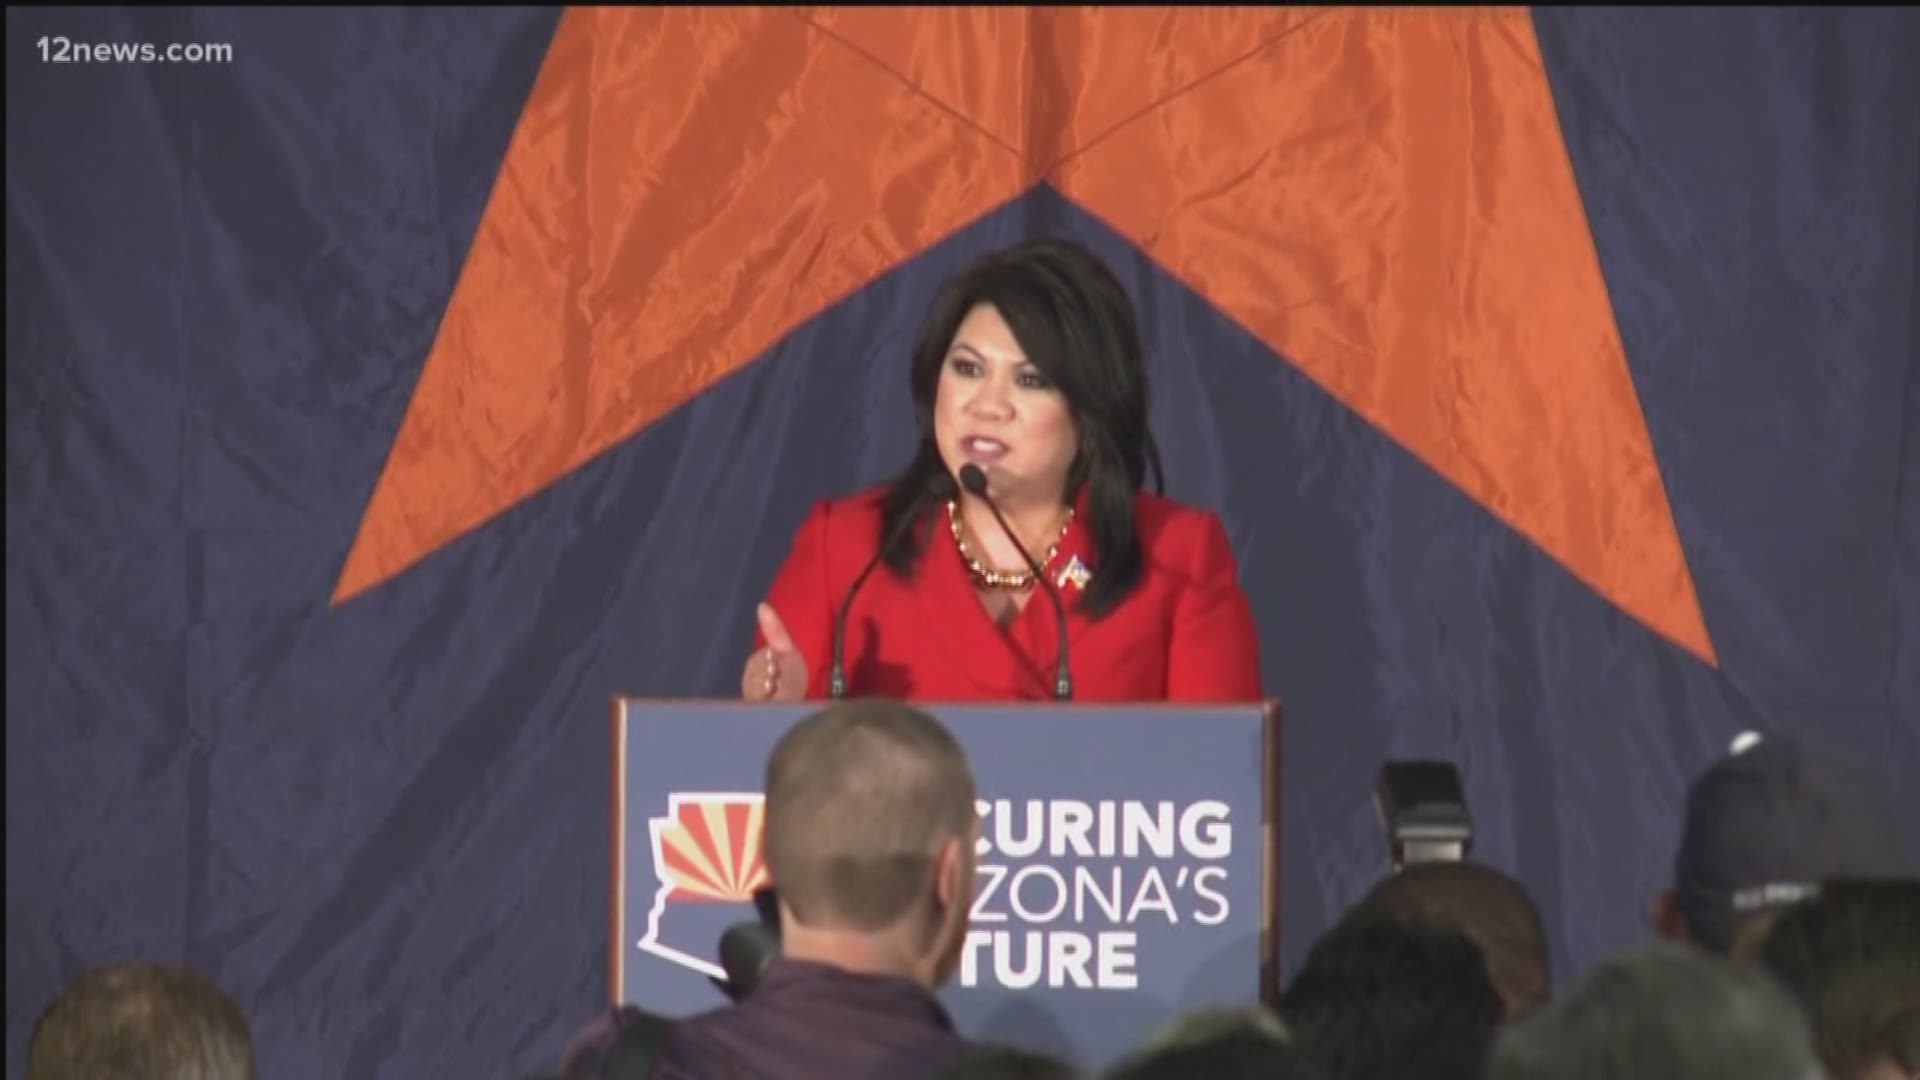 Kimberly Yee is the Republican candidate for AZ State Treasurer. Her is her acceptance speech.